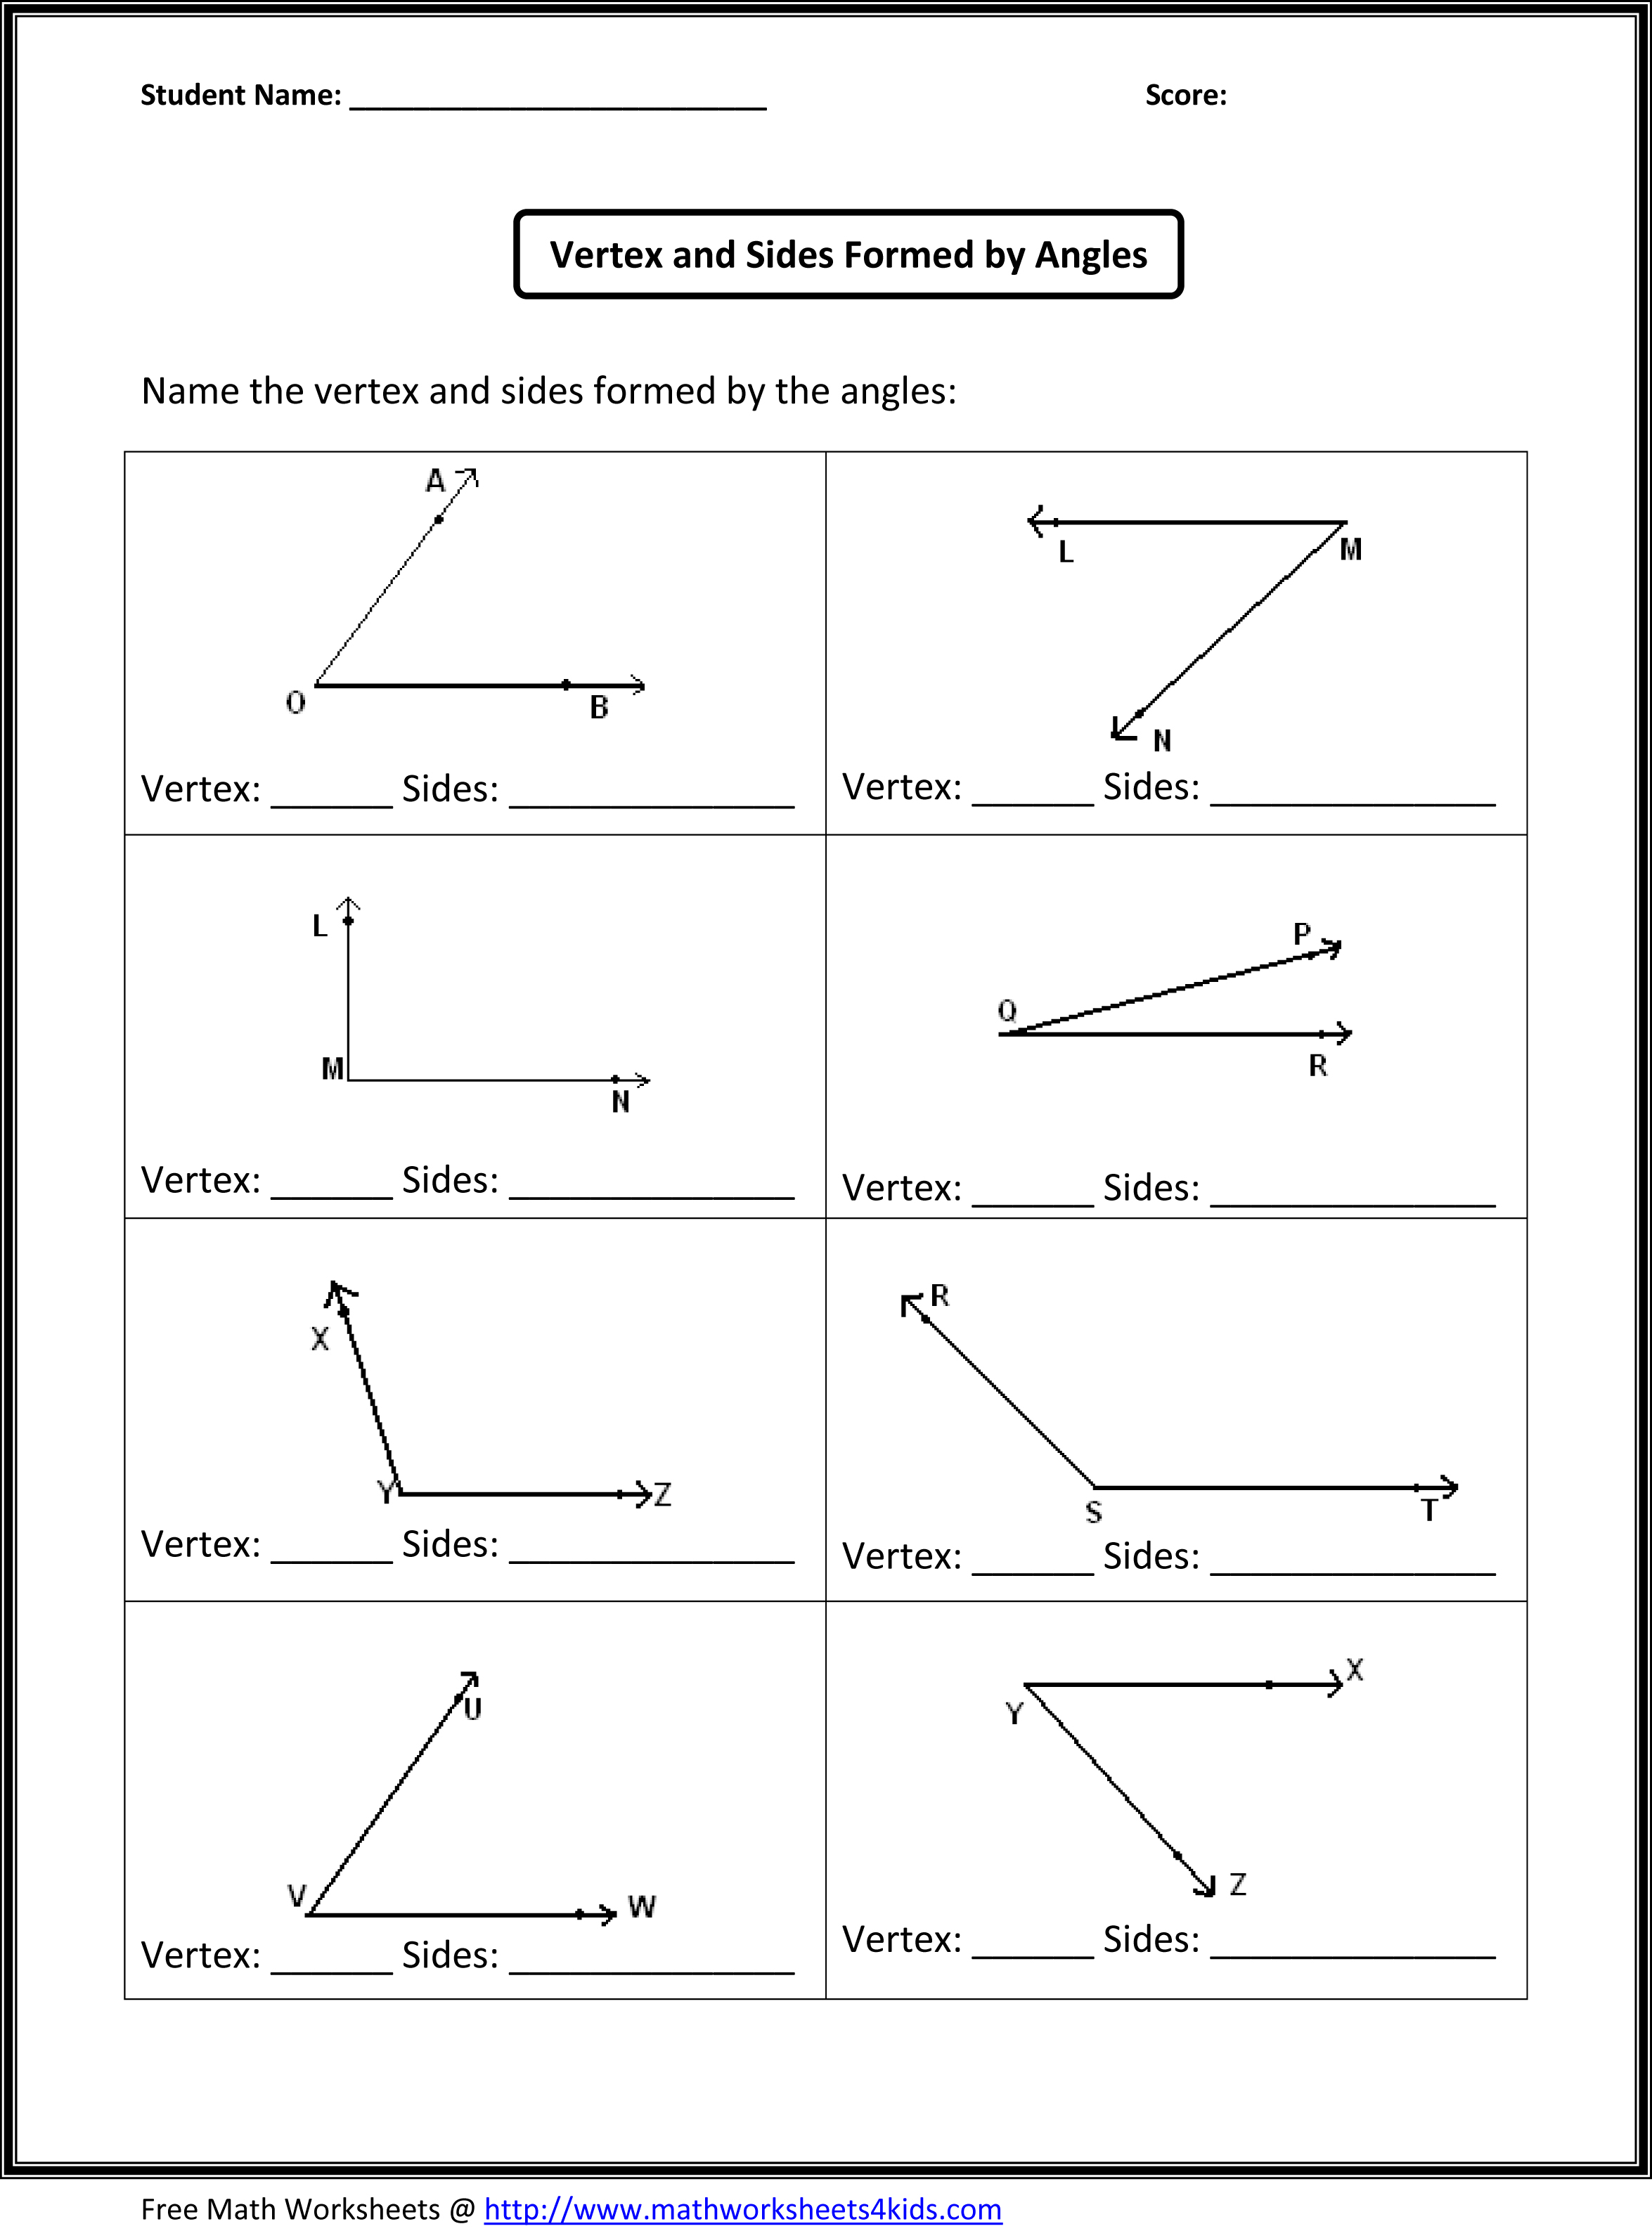 Vertex and Sides Formed by Angles